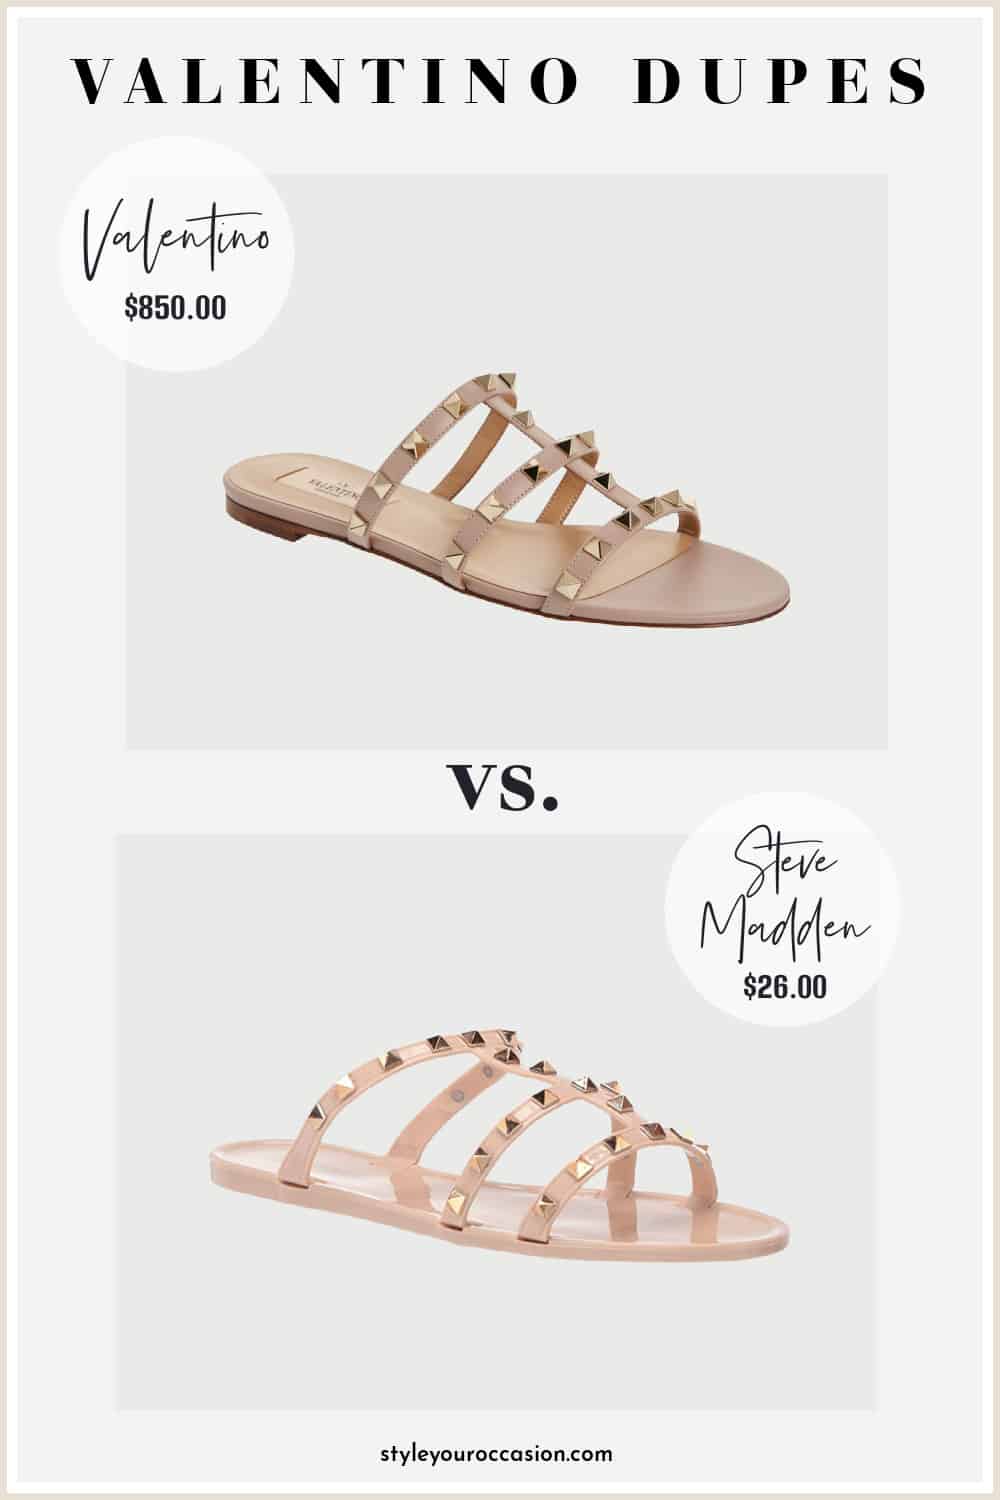 image of two nude sandals, with stud details and straps, one from Valentino, the other a designer dupe from Steve Madden